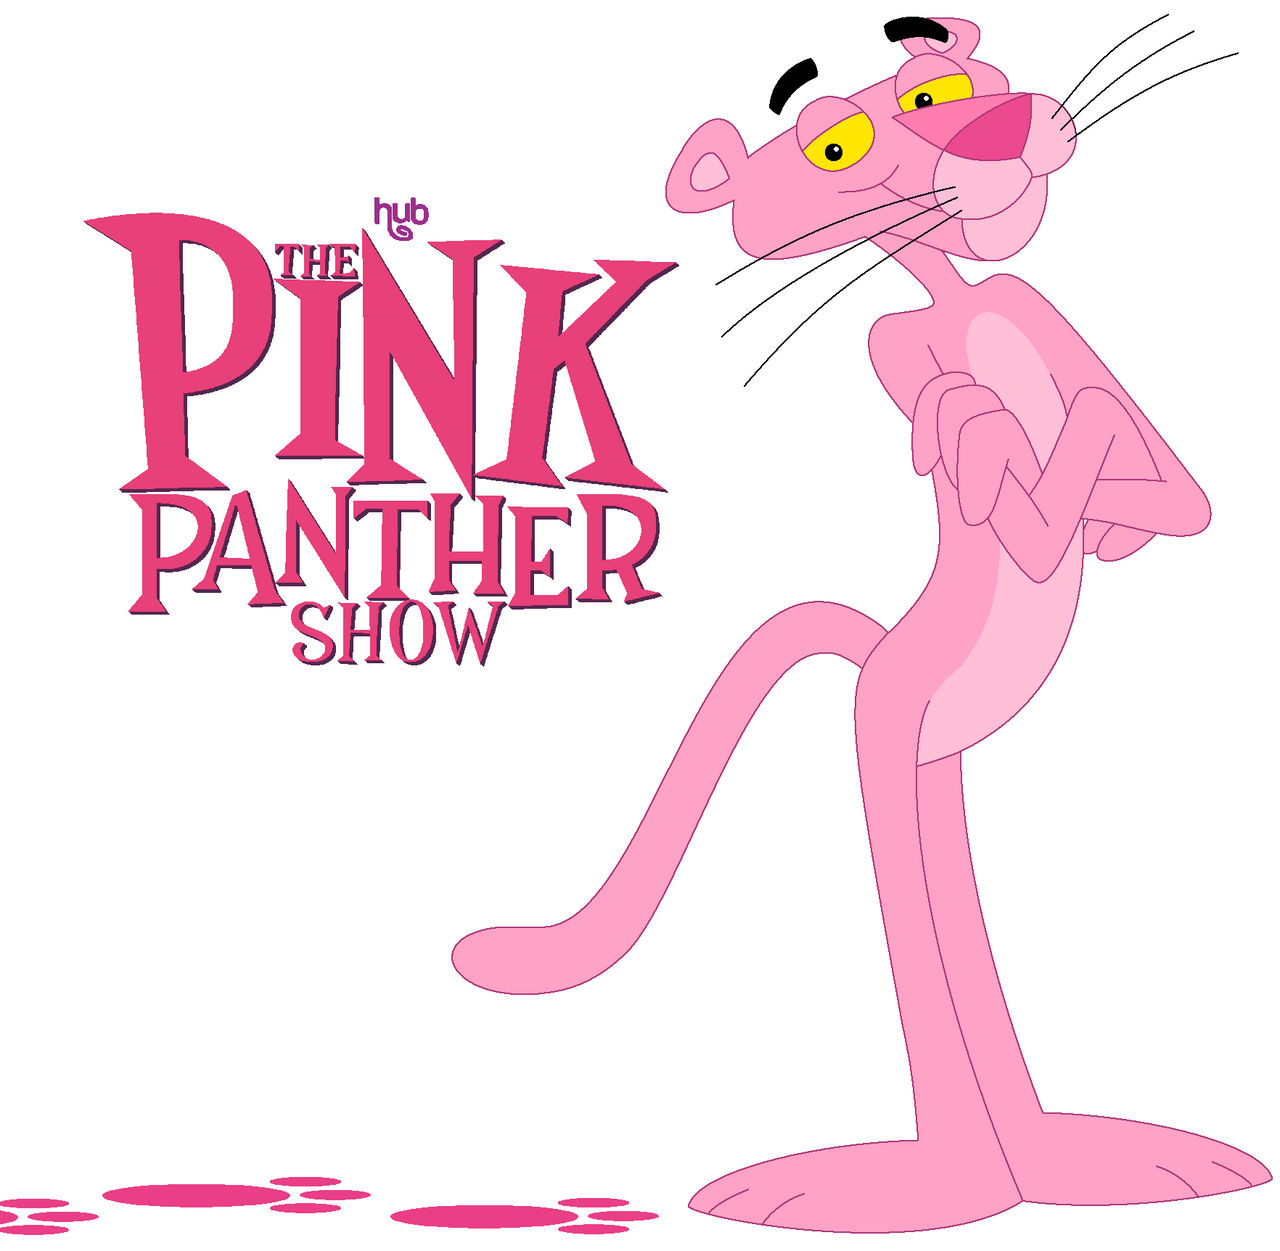 Human pink panther in 2022, Concept art characters, Cartoon art styles,  Character art